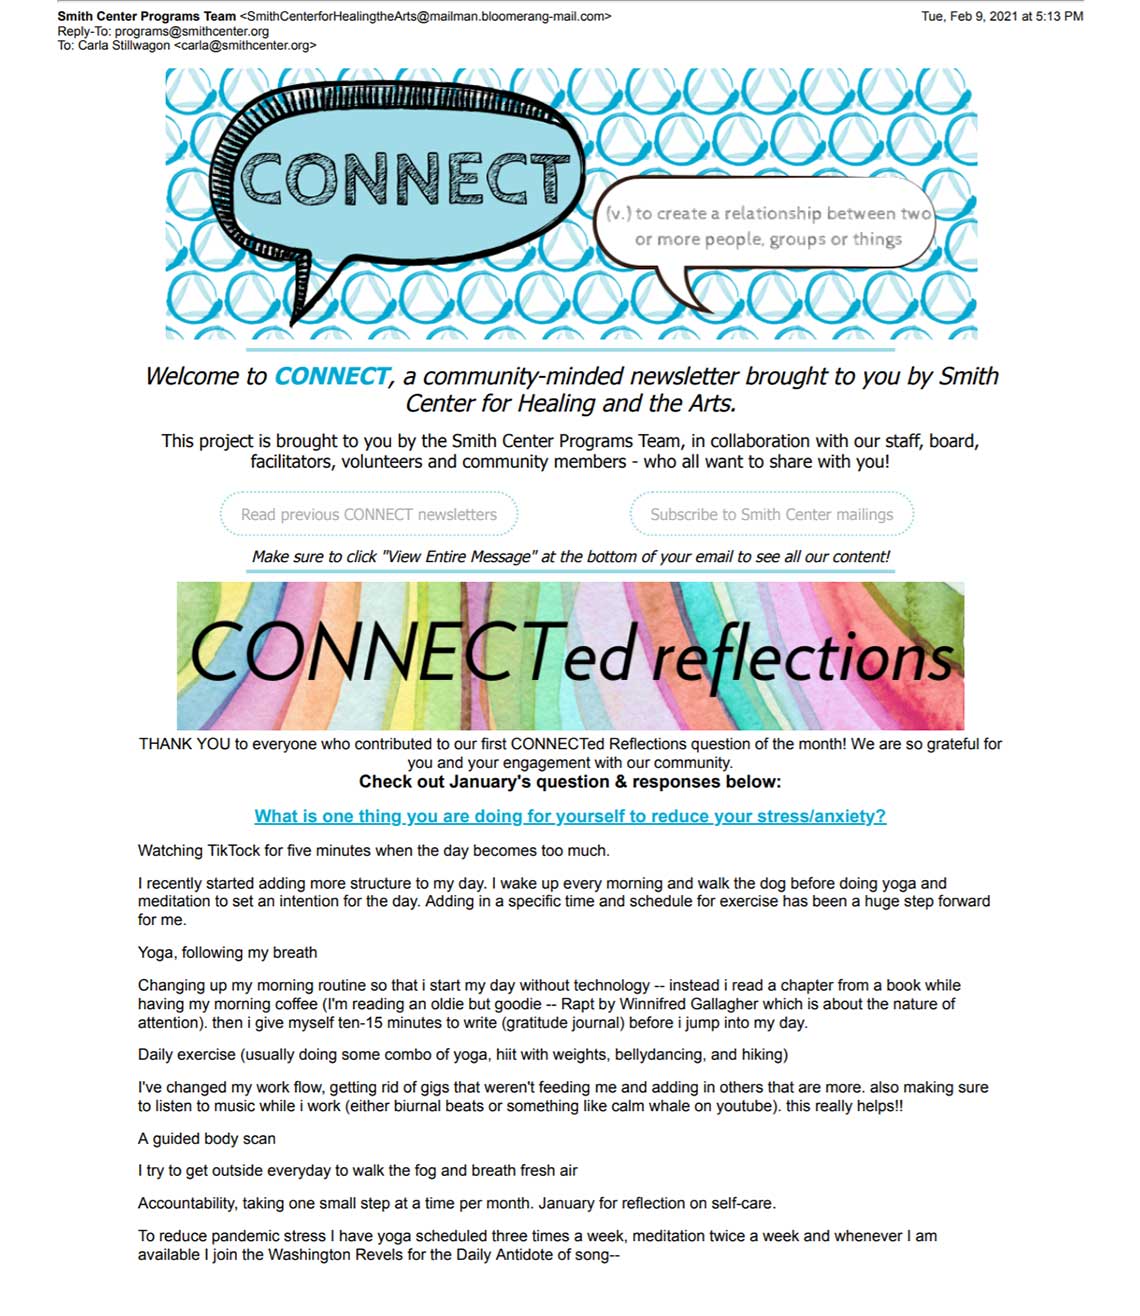 CONNECT Newsletter February 9, 2021